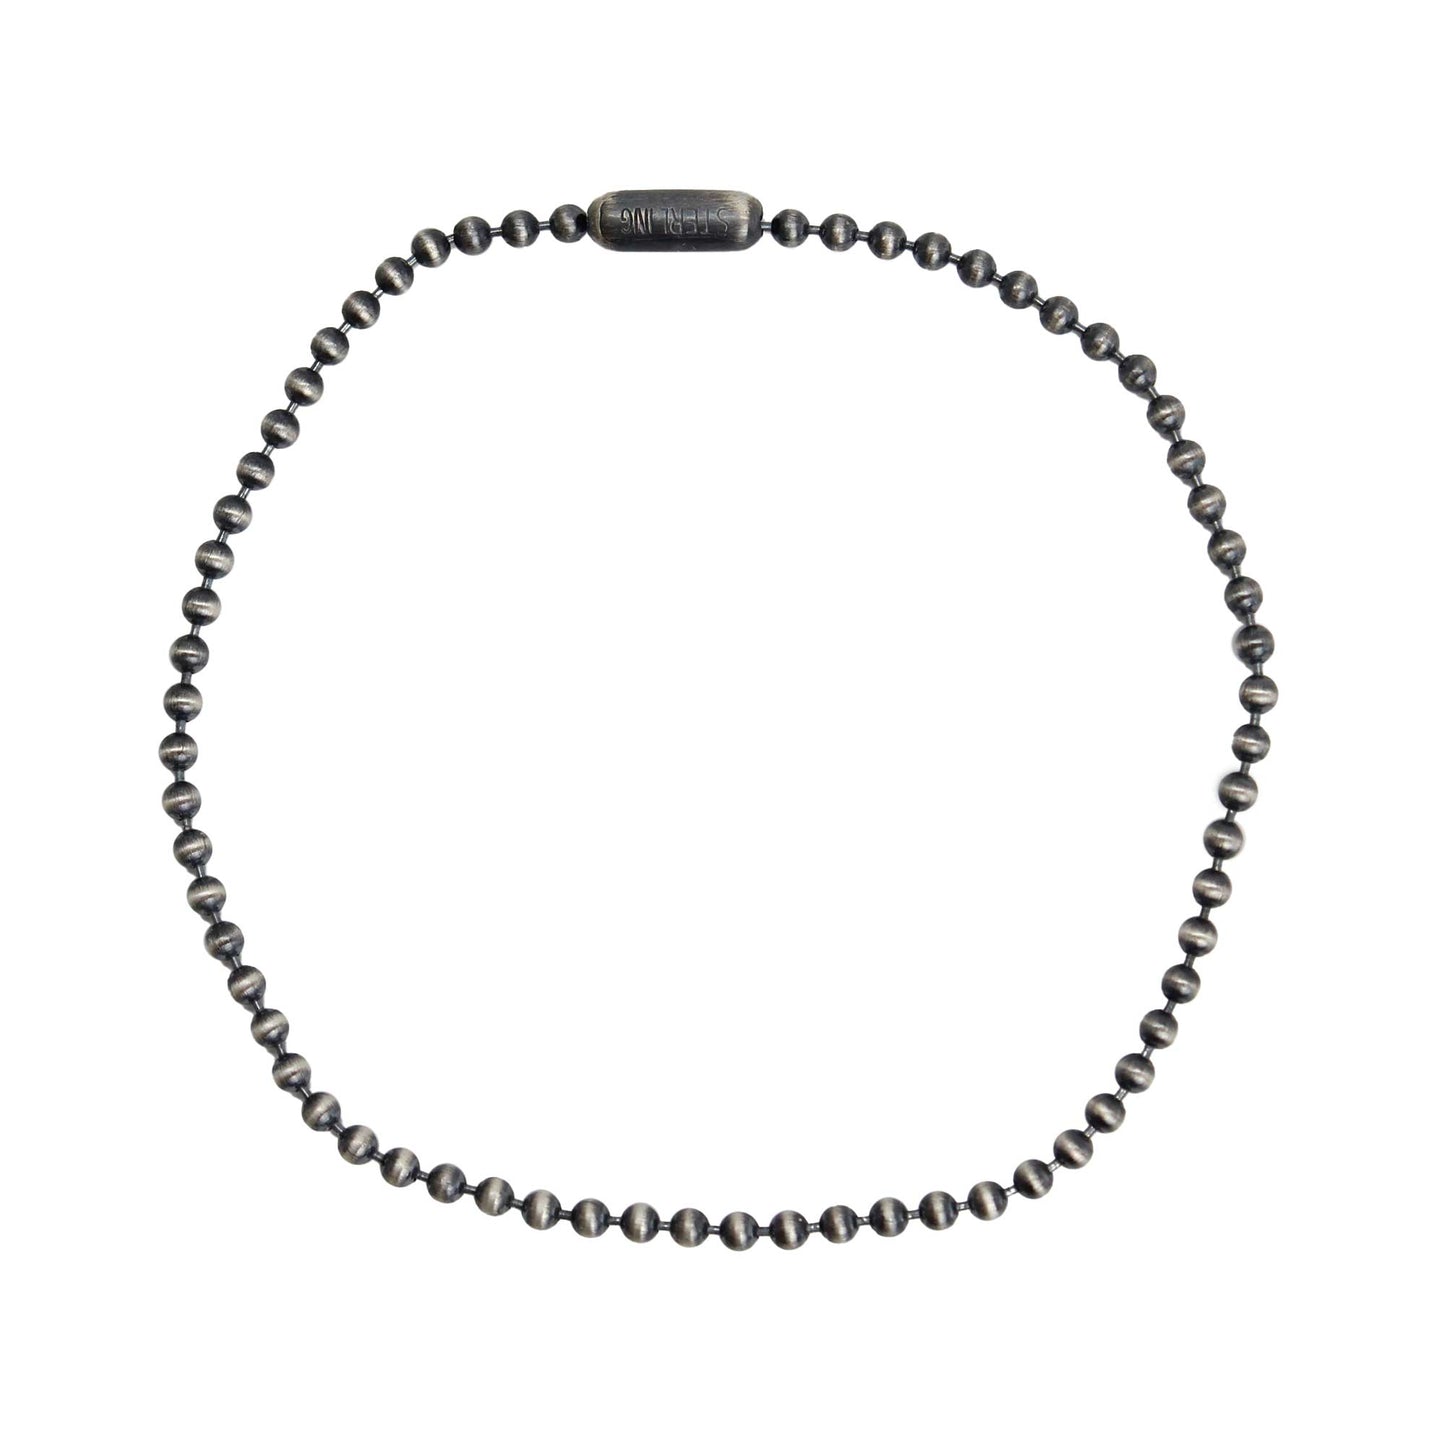 2mm Sterling Silver Bead Ball Chain Bracelet or Necklace